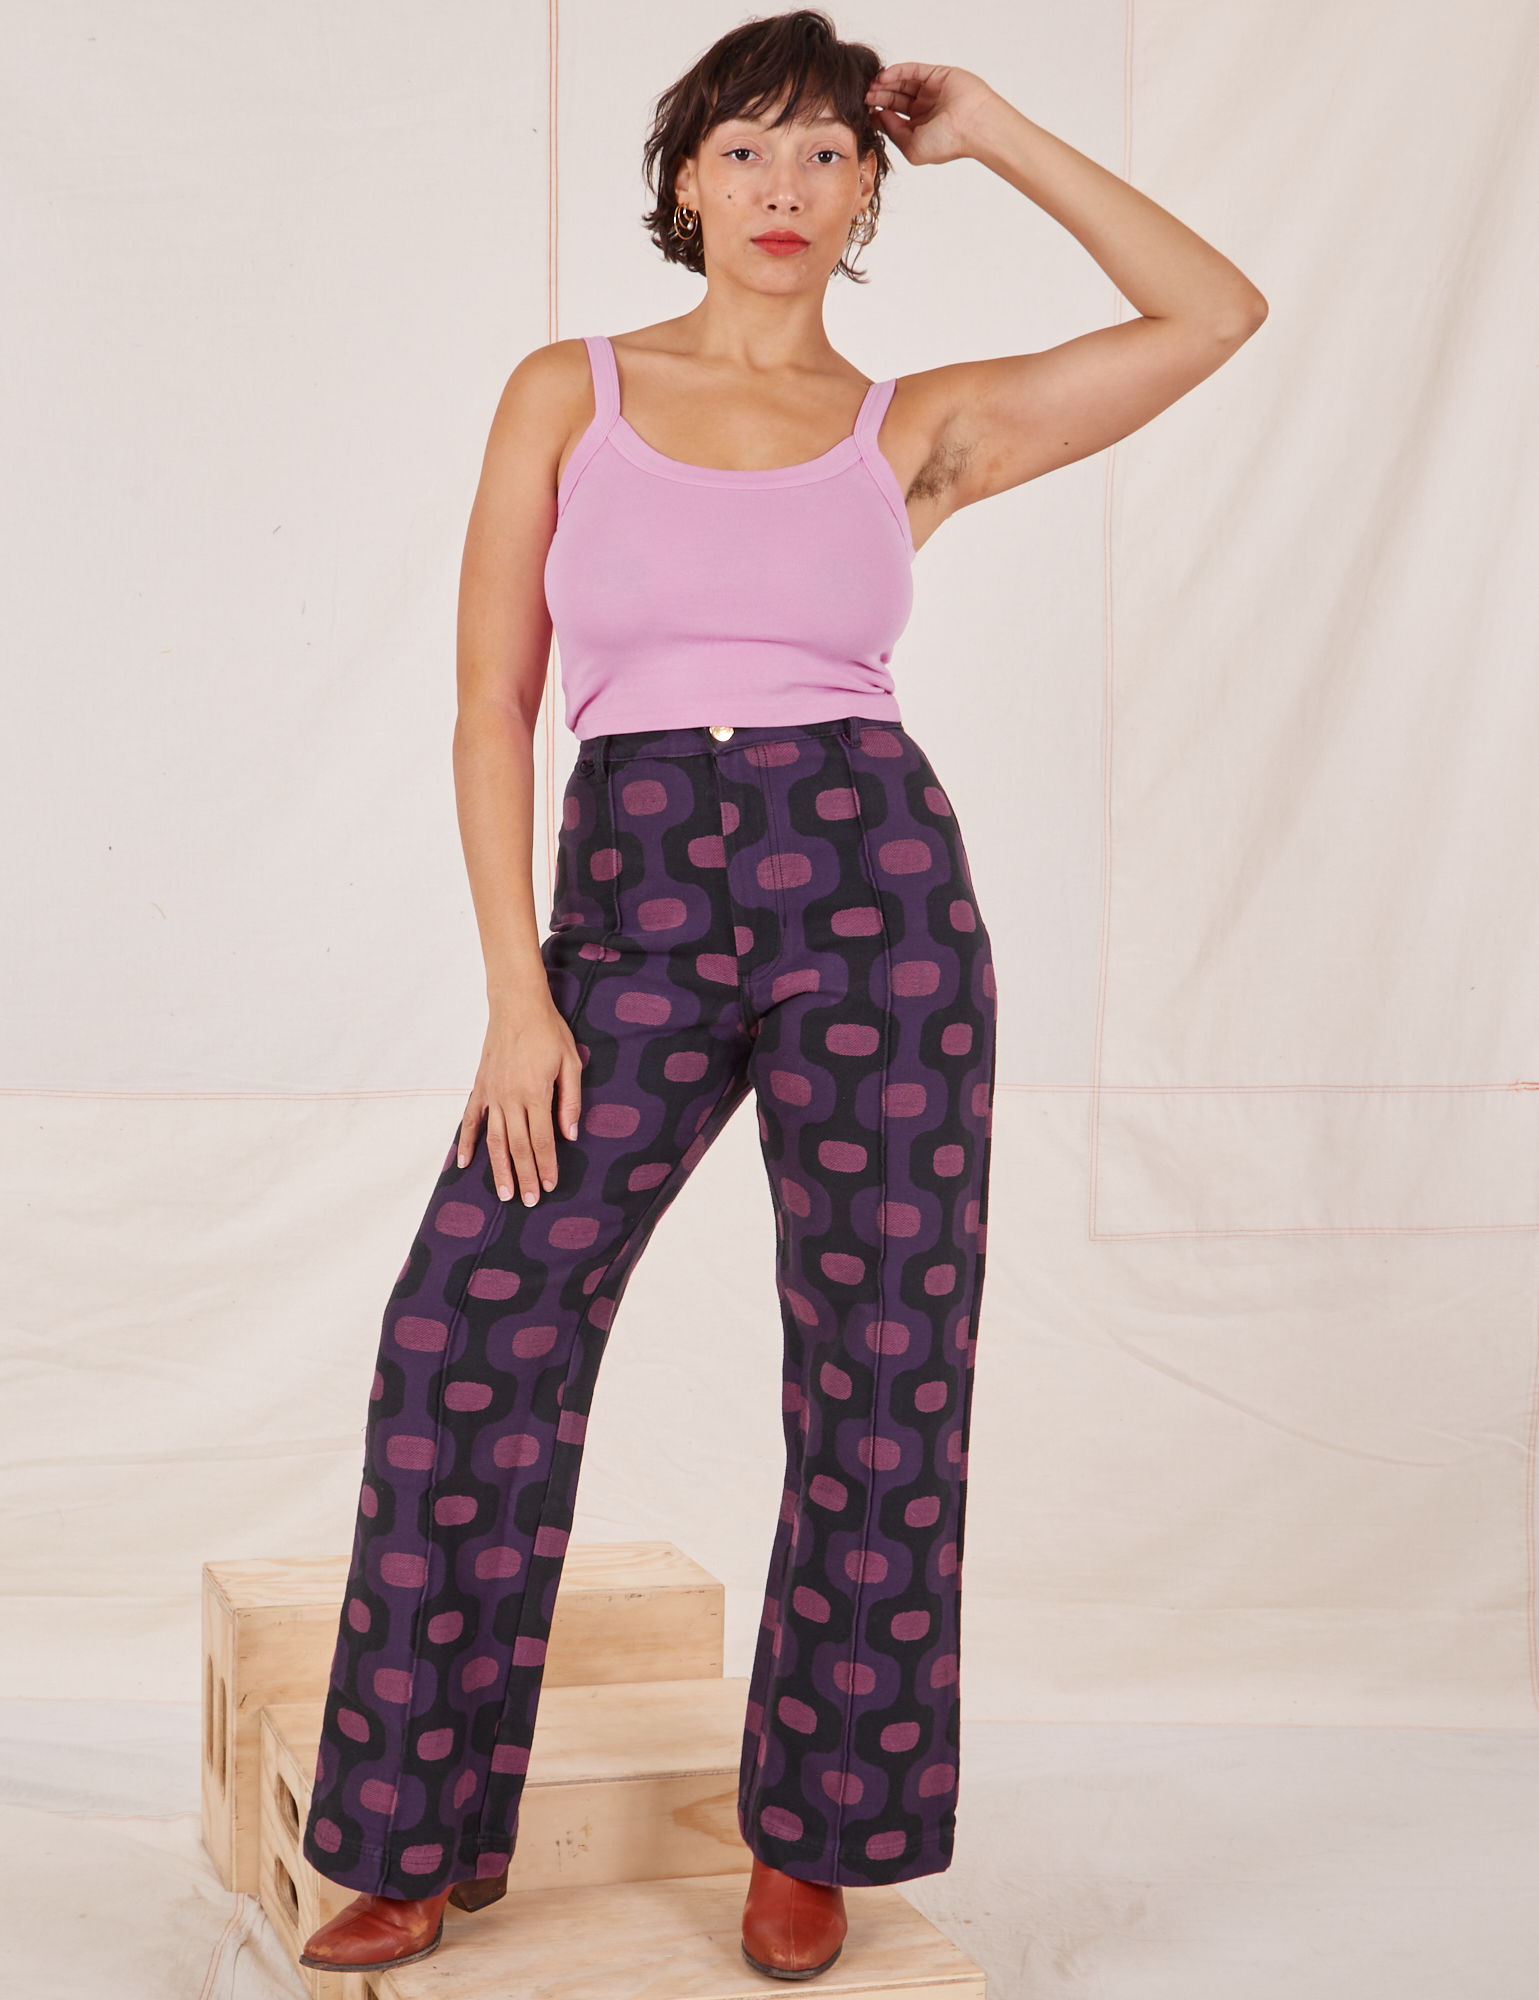 Tiara is 5'4" and wearing S Western Pants in Purple Tile Jacquard paired with bubblegum pink Cami